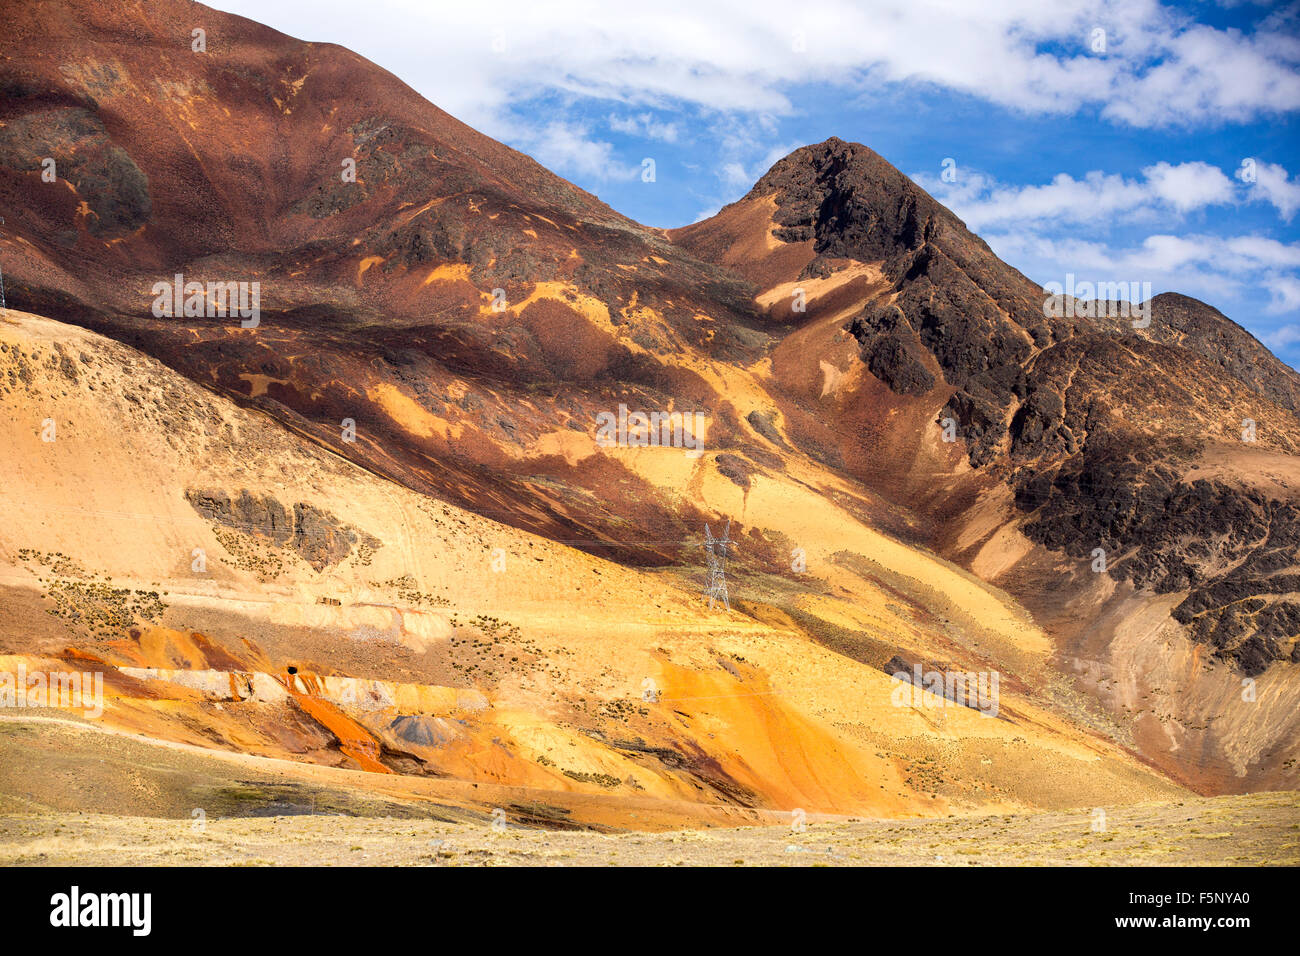 Contaminated mine effluent leaking out of a mine on Chacaltaya peak in the Bolivian Andes. Stock Photo